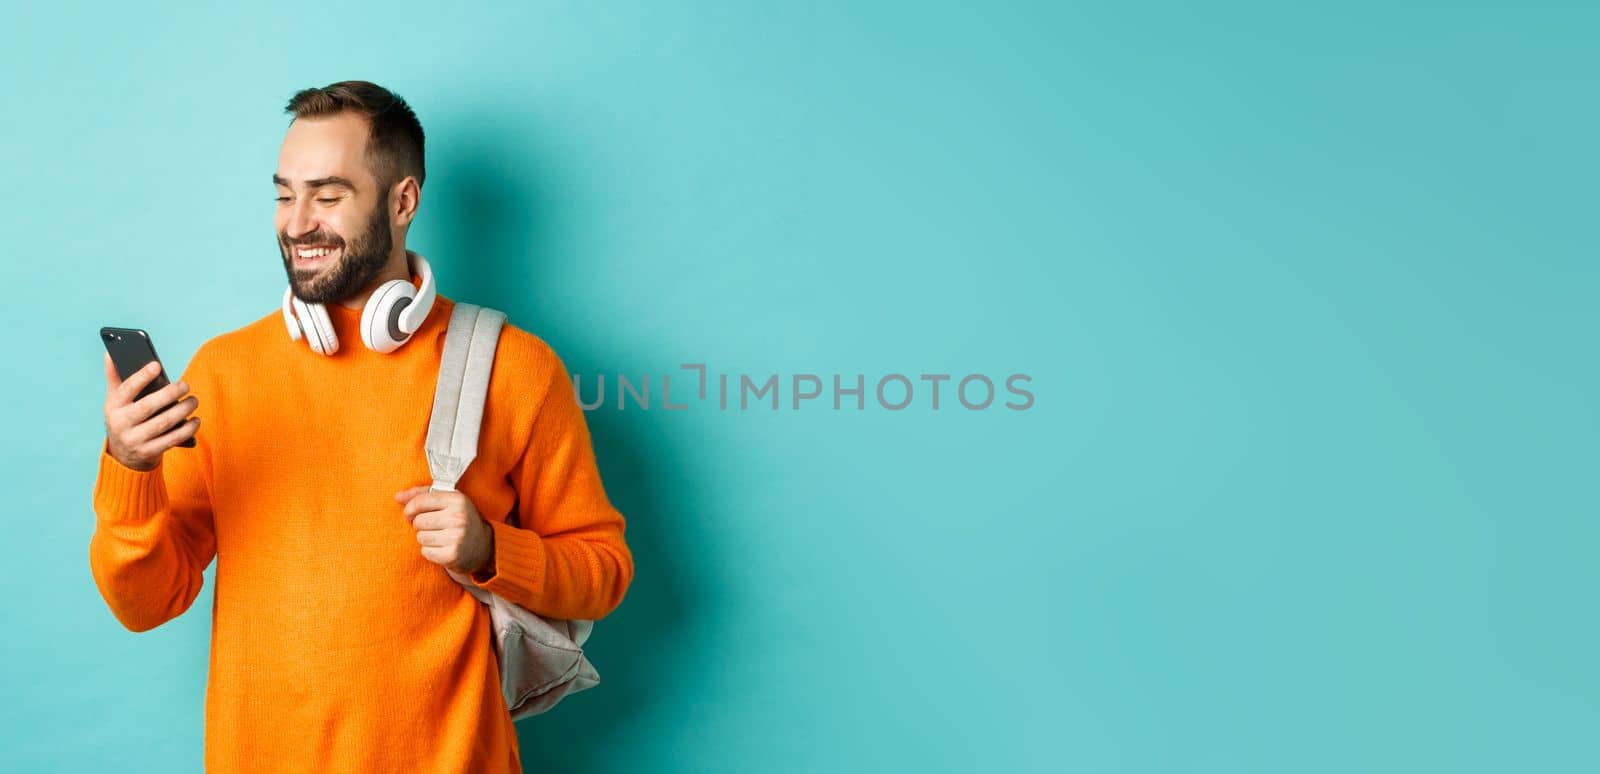 Caucasian man with headphones and backpack looking at phone, reading message and smiling, standing over turquoise background.